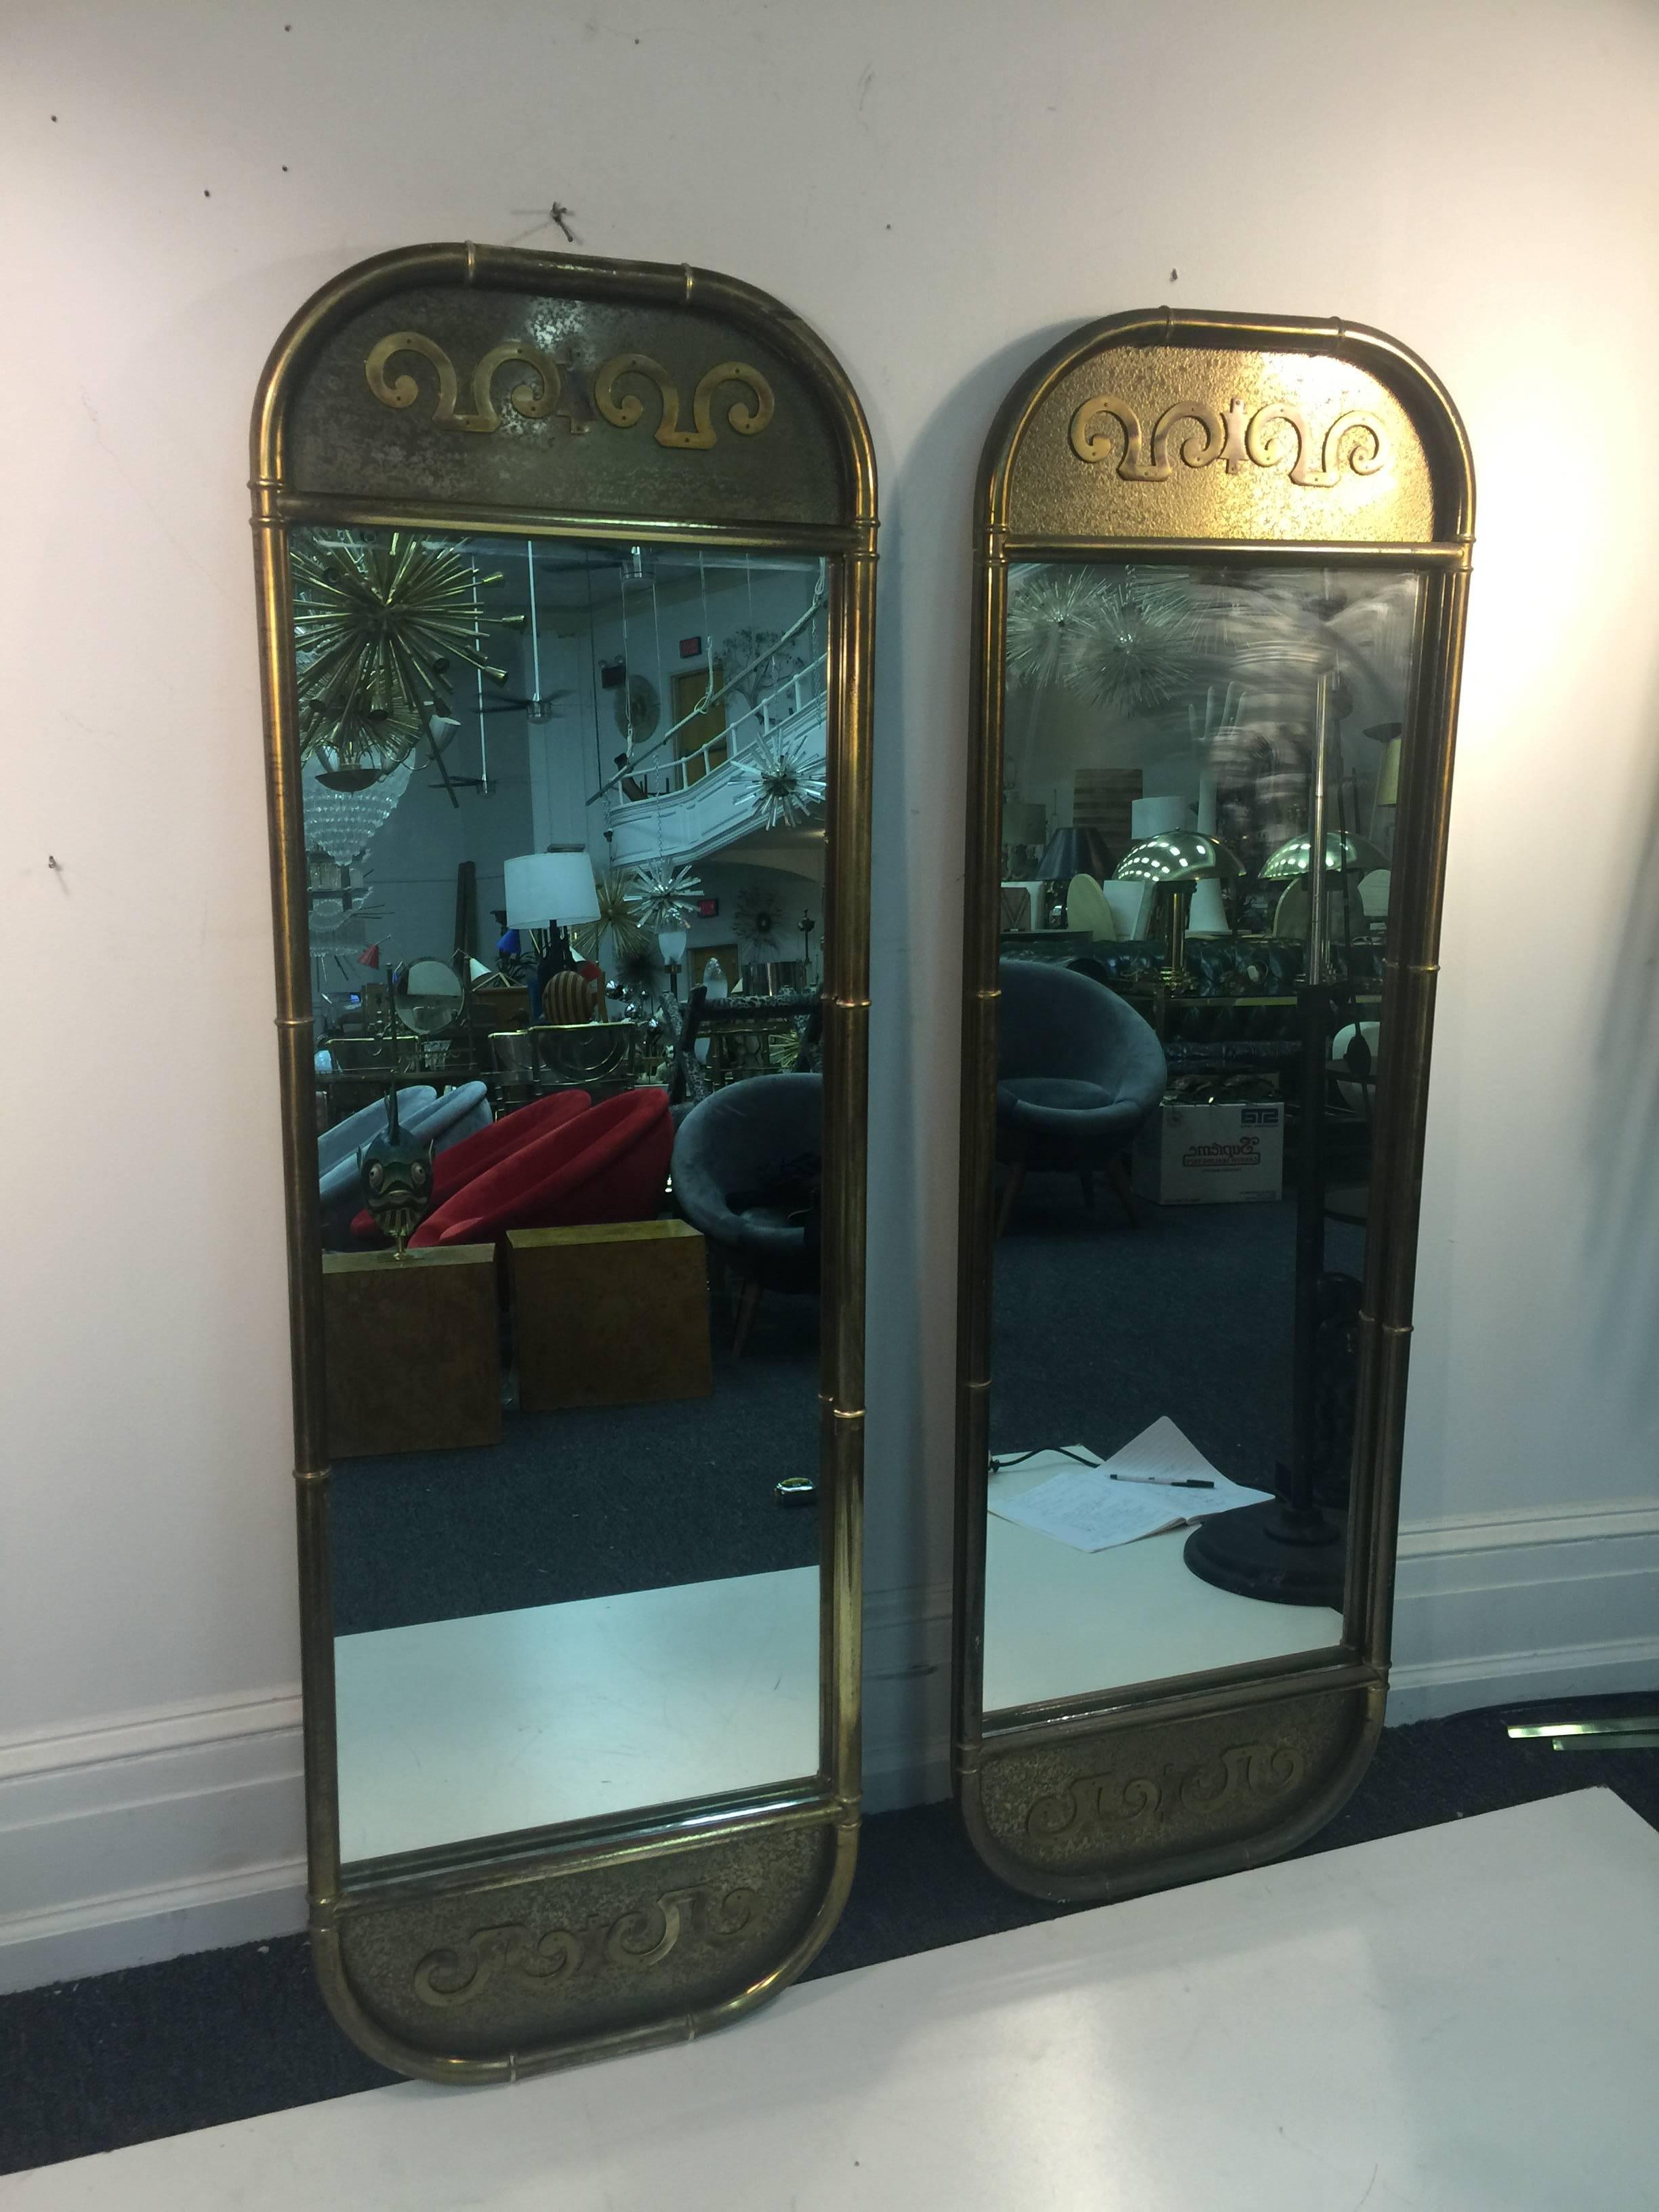 A magnificent pair of mastercraft full-length, brass, oblong wall mirrors with great detail, circa 1970. Wear consistent with age and use. Can be sold individually for $4950 each.